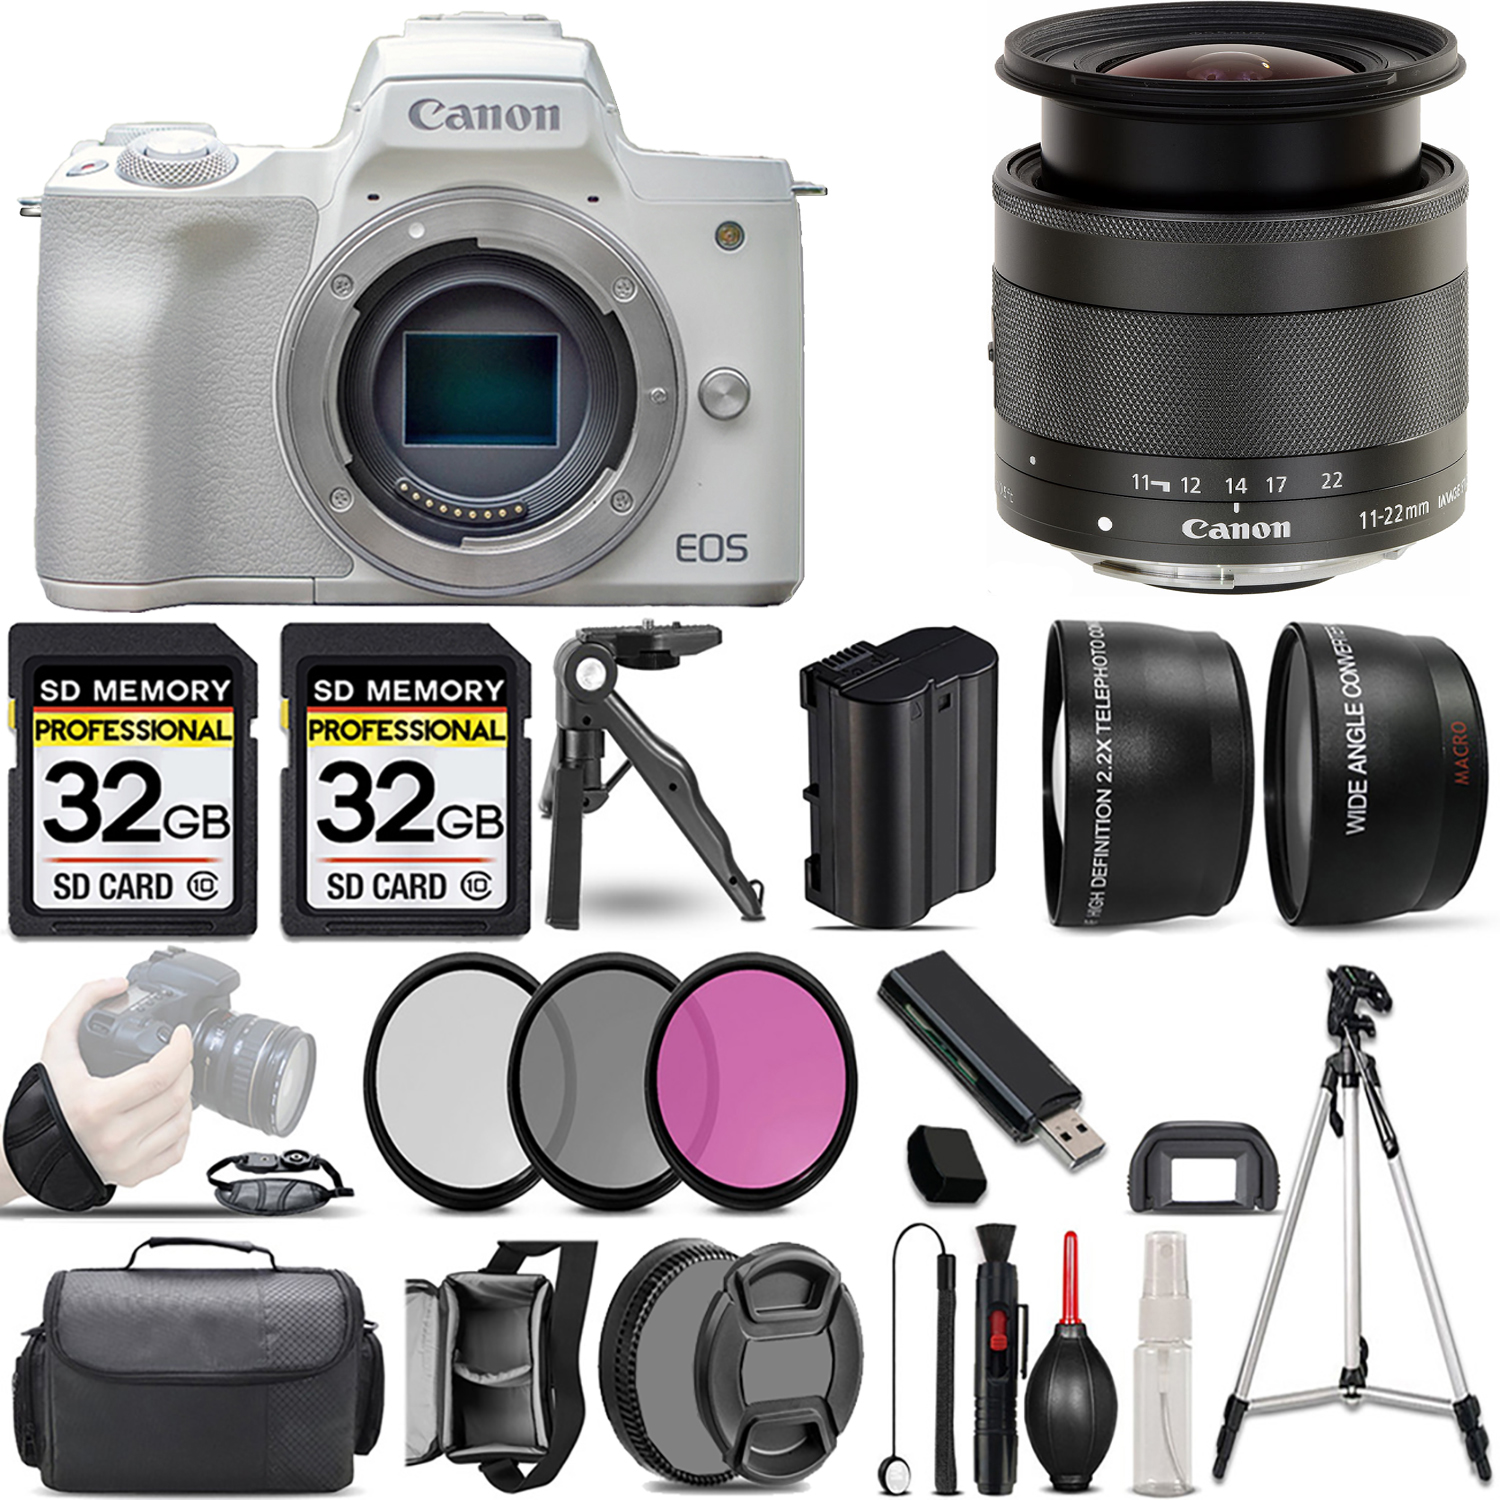 EOS M50 Mark II Camera (White) + 11-22mm f/4-5.6 IS STM Lens + 3 Piece Filter Set + 64GB *FREE SHIPPING*